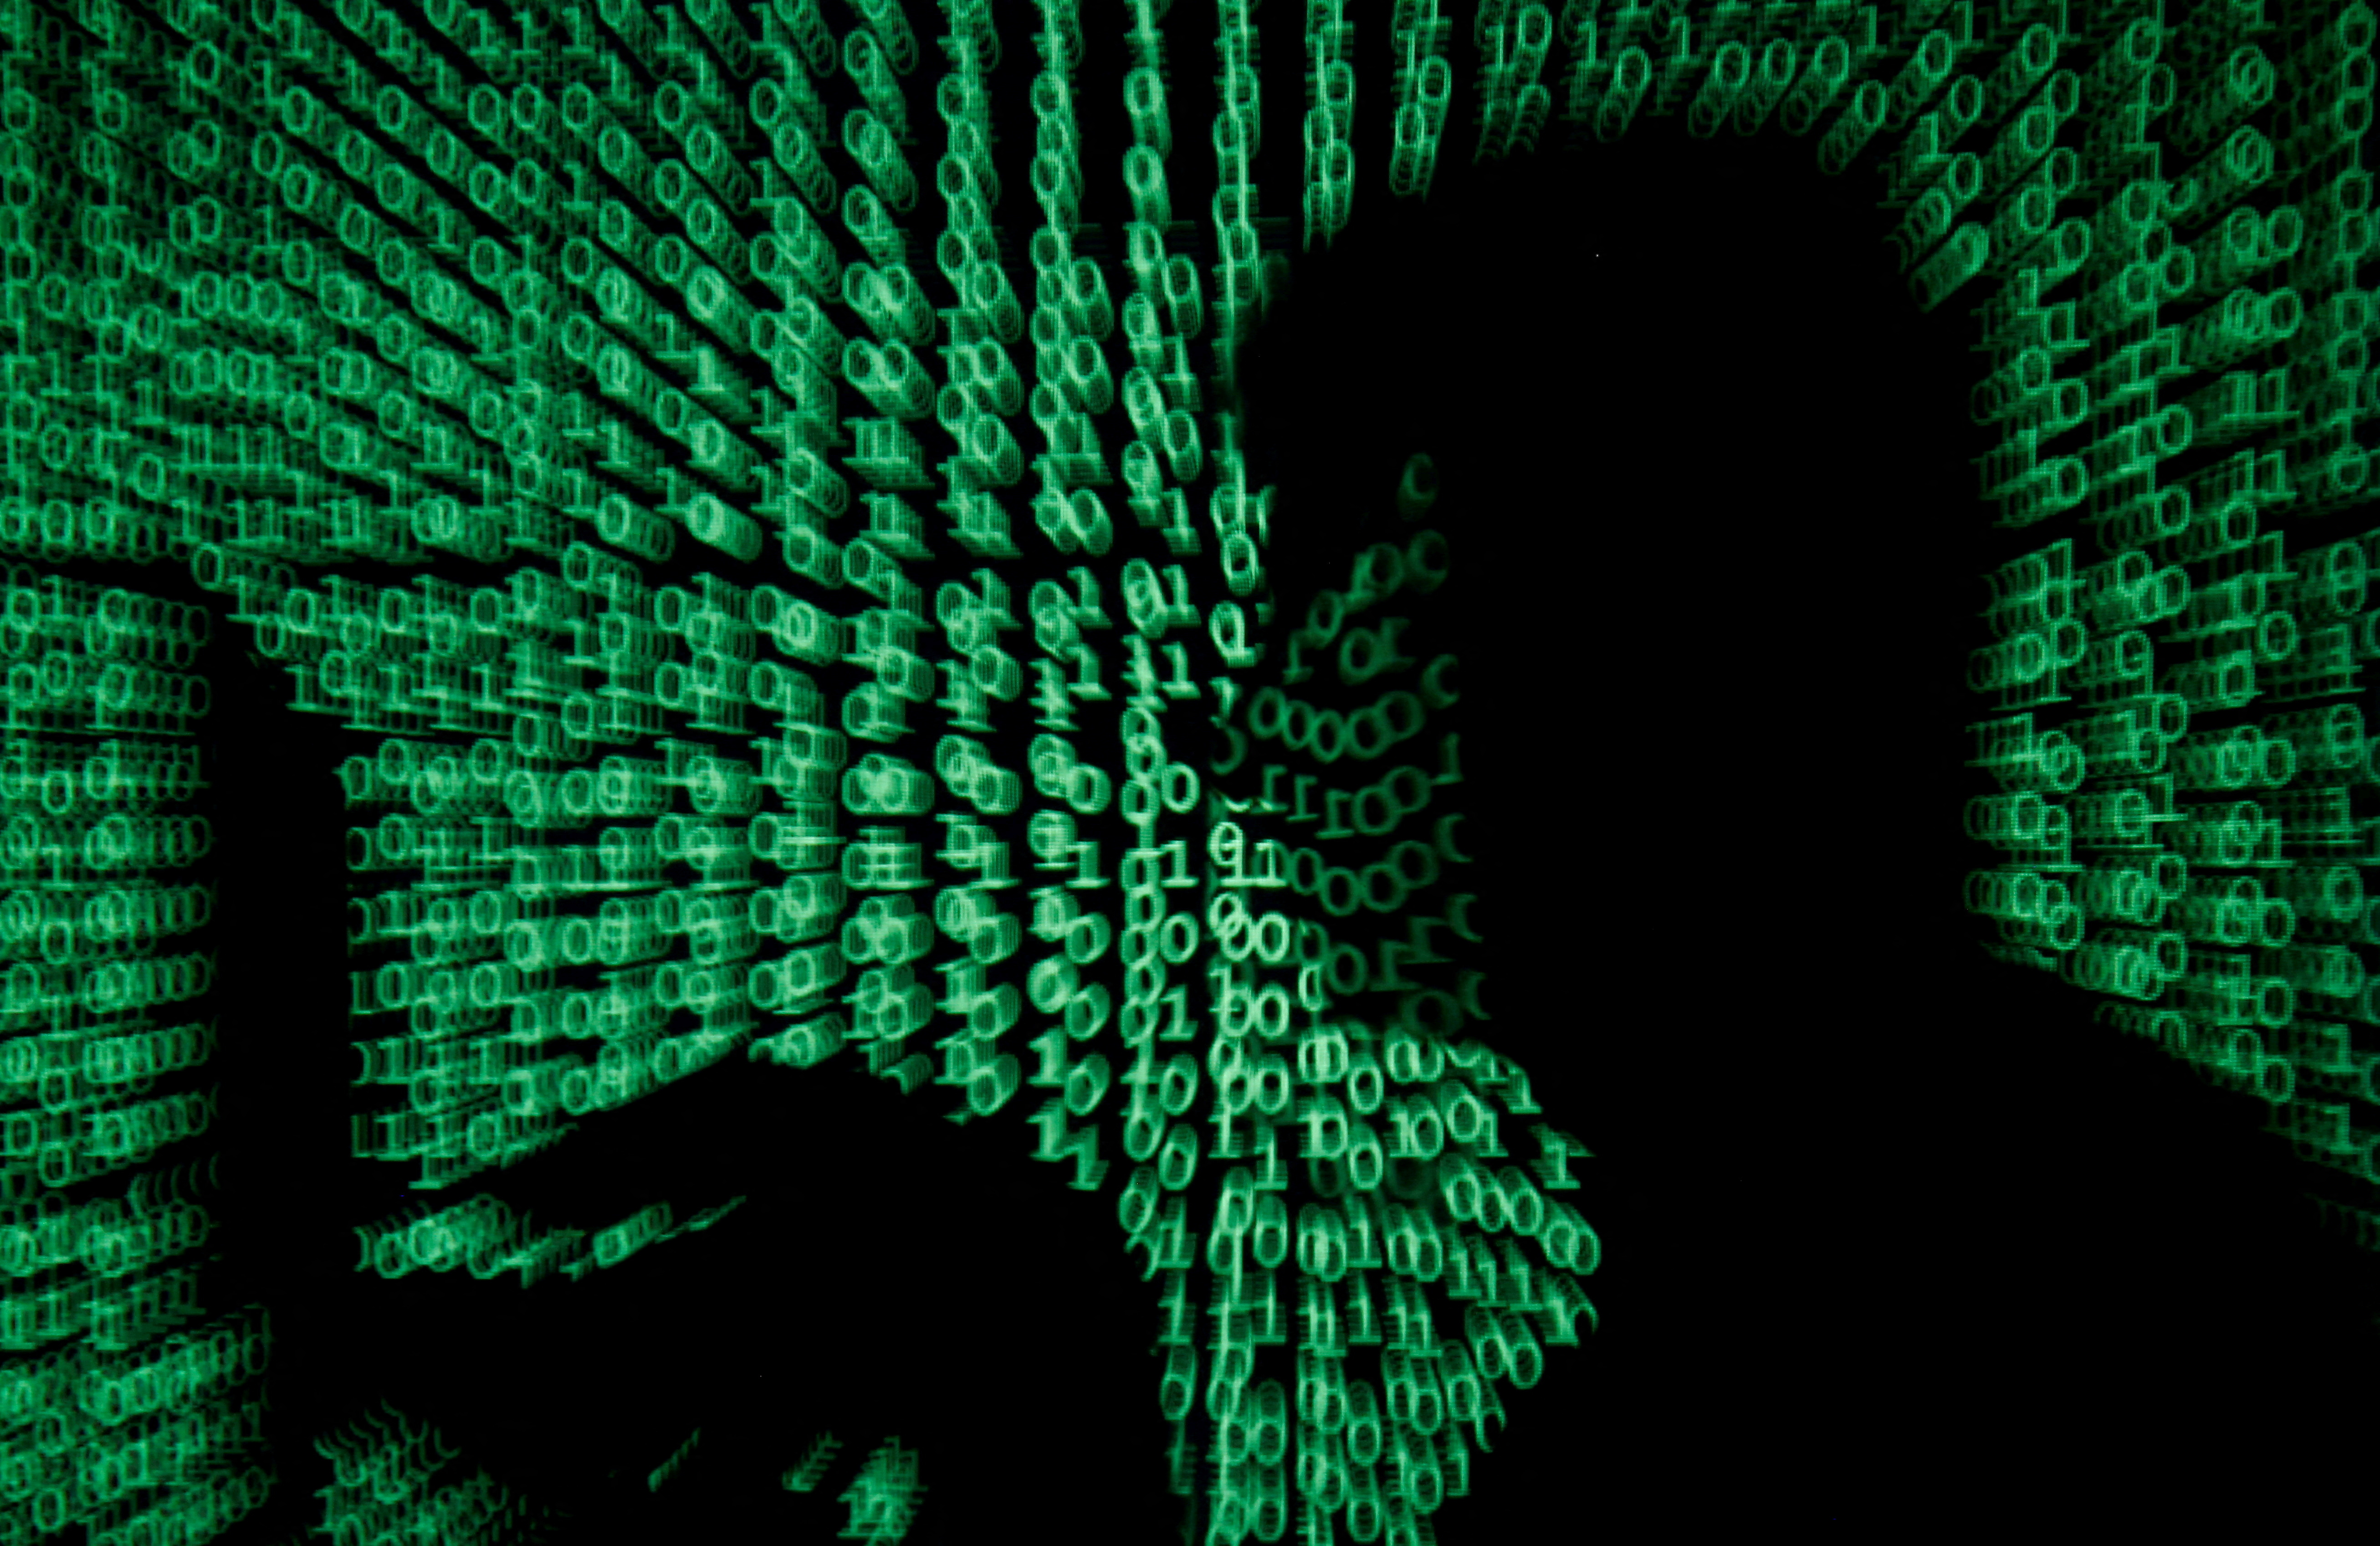 Civilian cyber-hackers engaged in conflicts have been ordered to abide by eight rules of engagement to protect the lives of civilians. /Kacper Pempel/Reuters